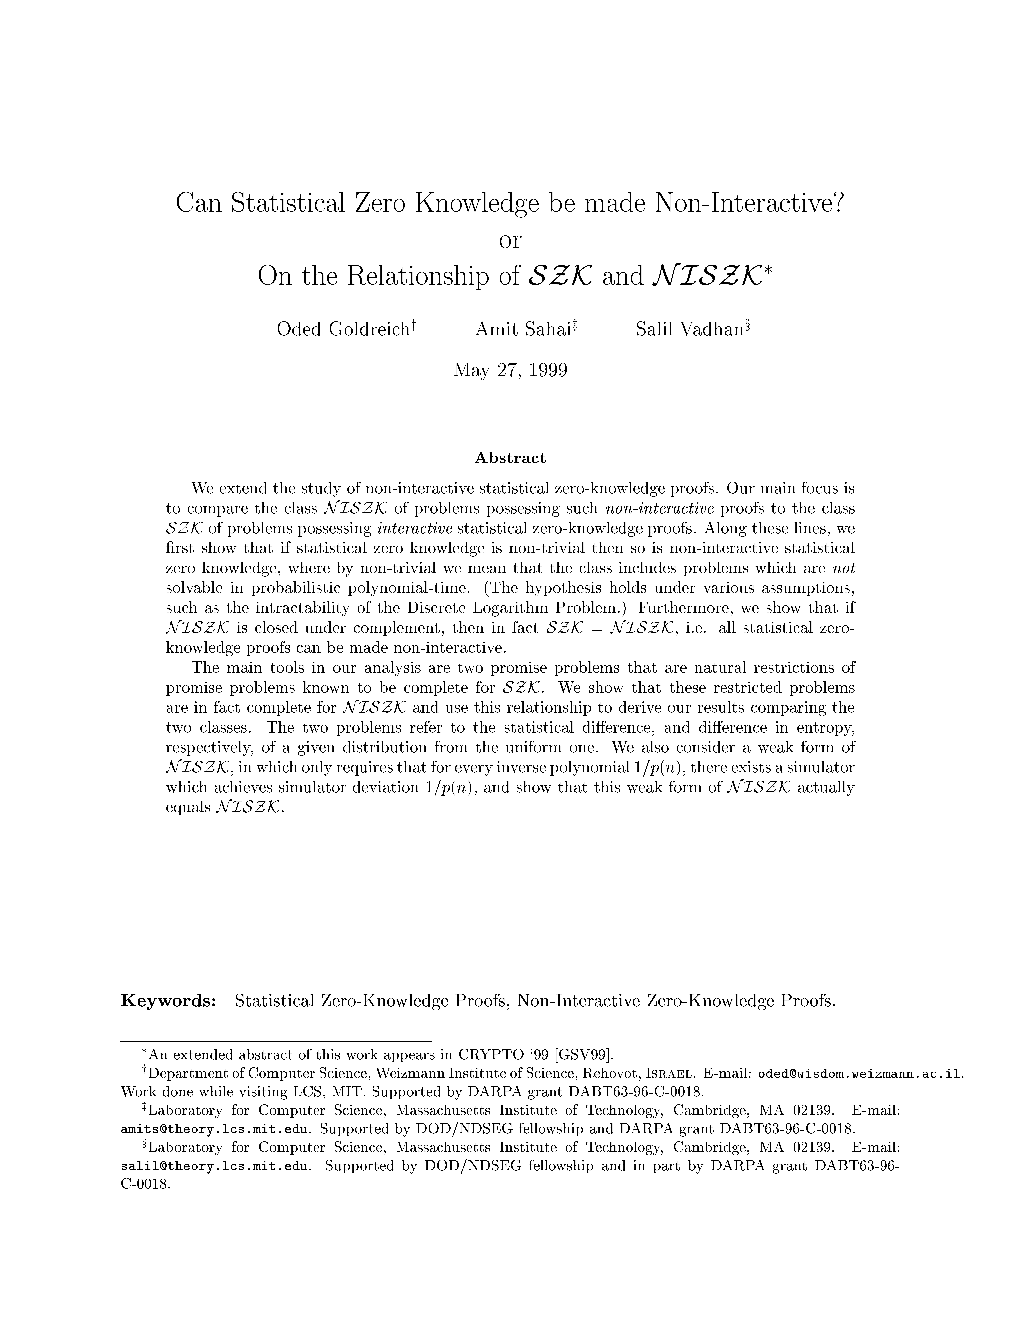 Can Statistical Zero Knowledge Be Made Non-Interactive? Or on The